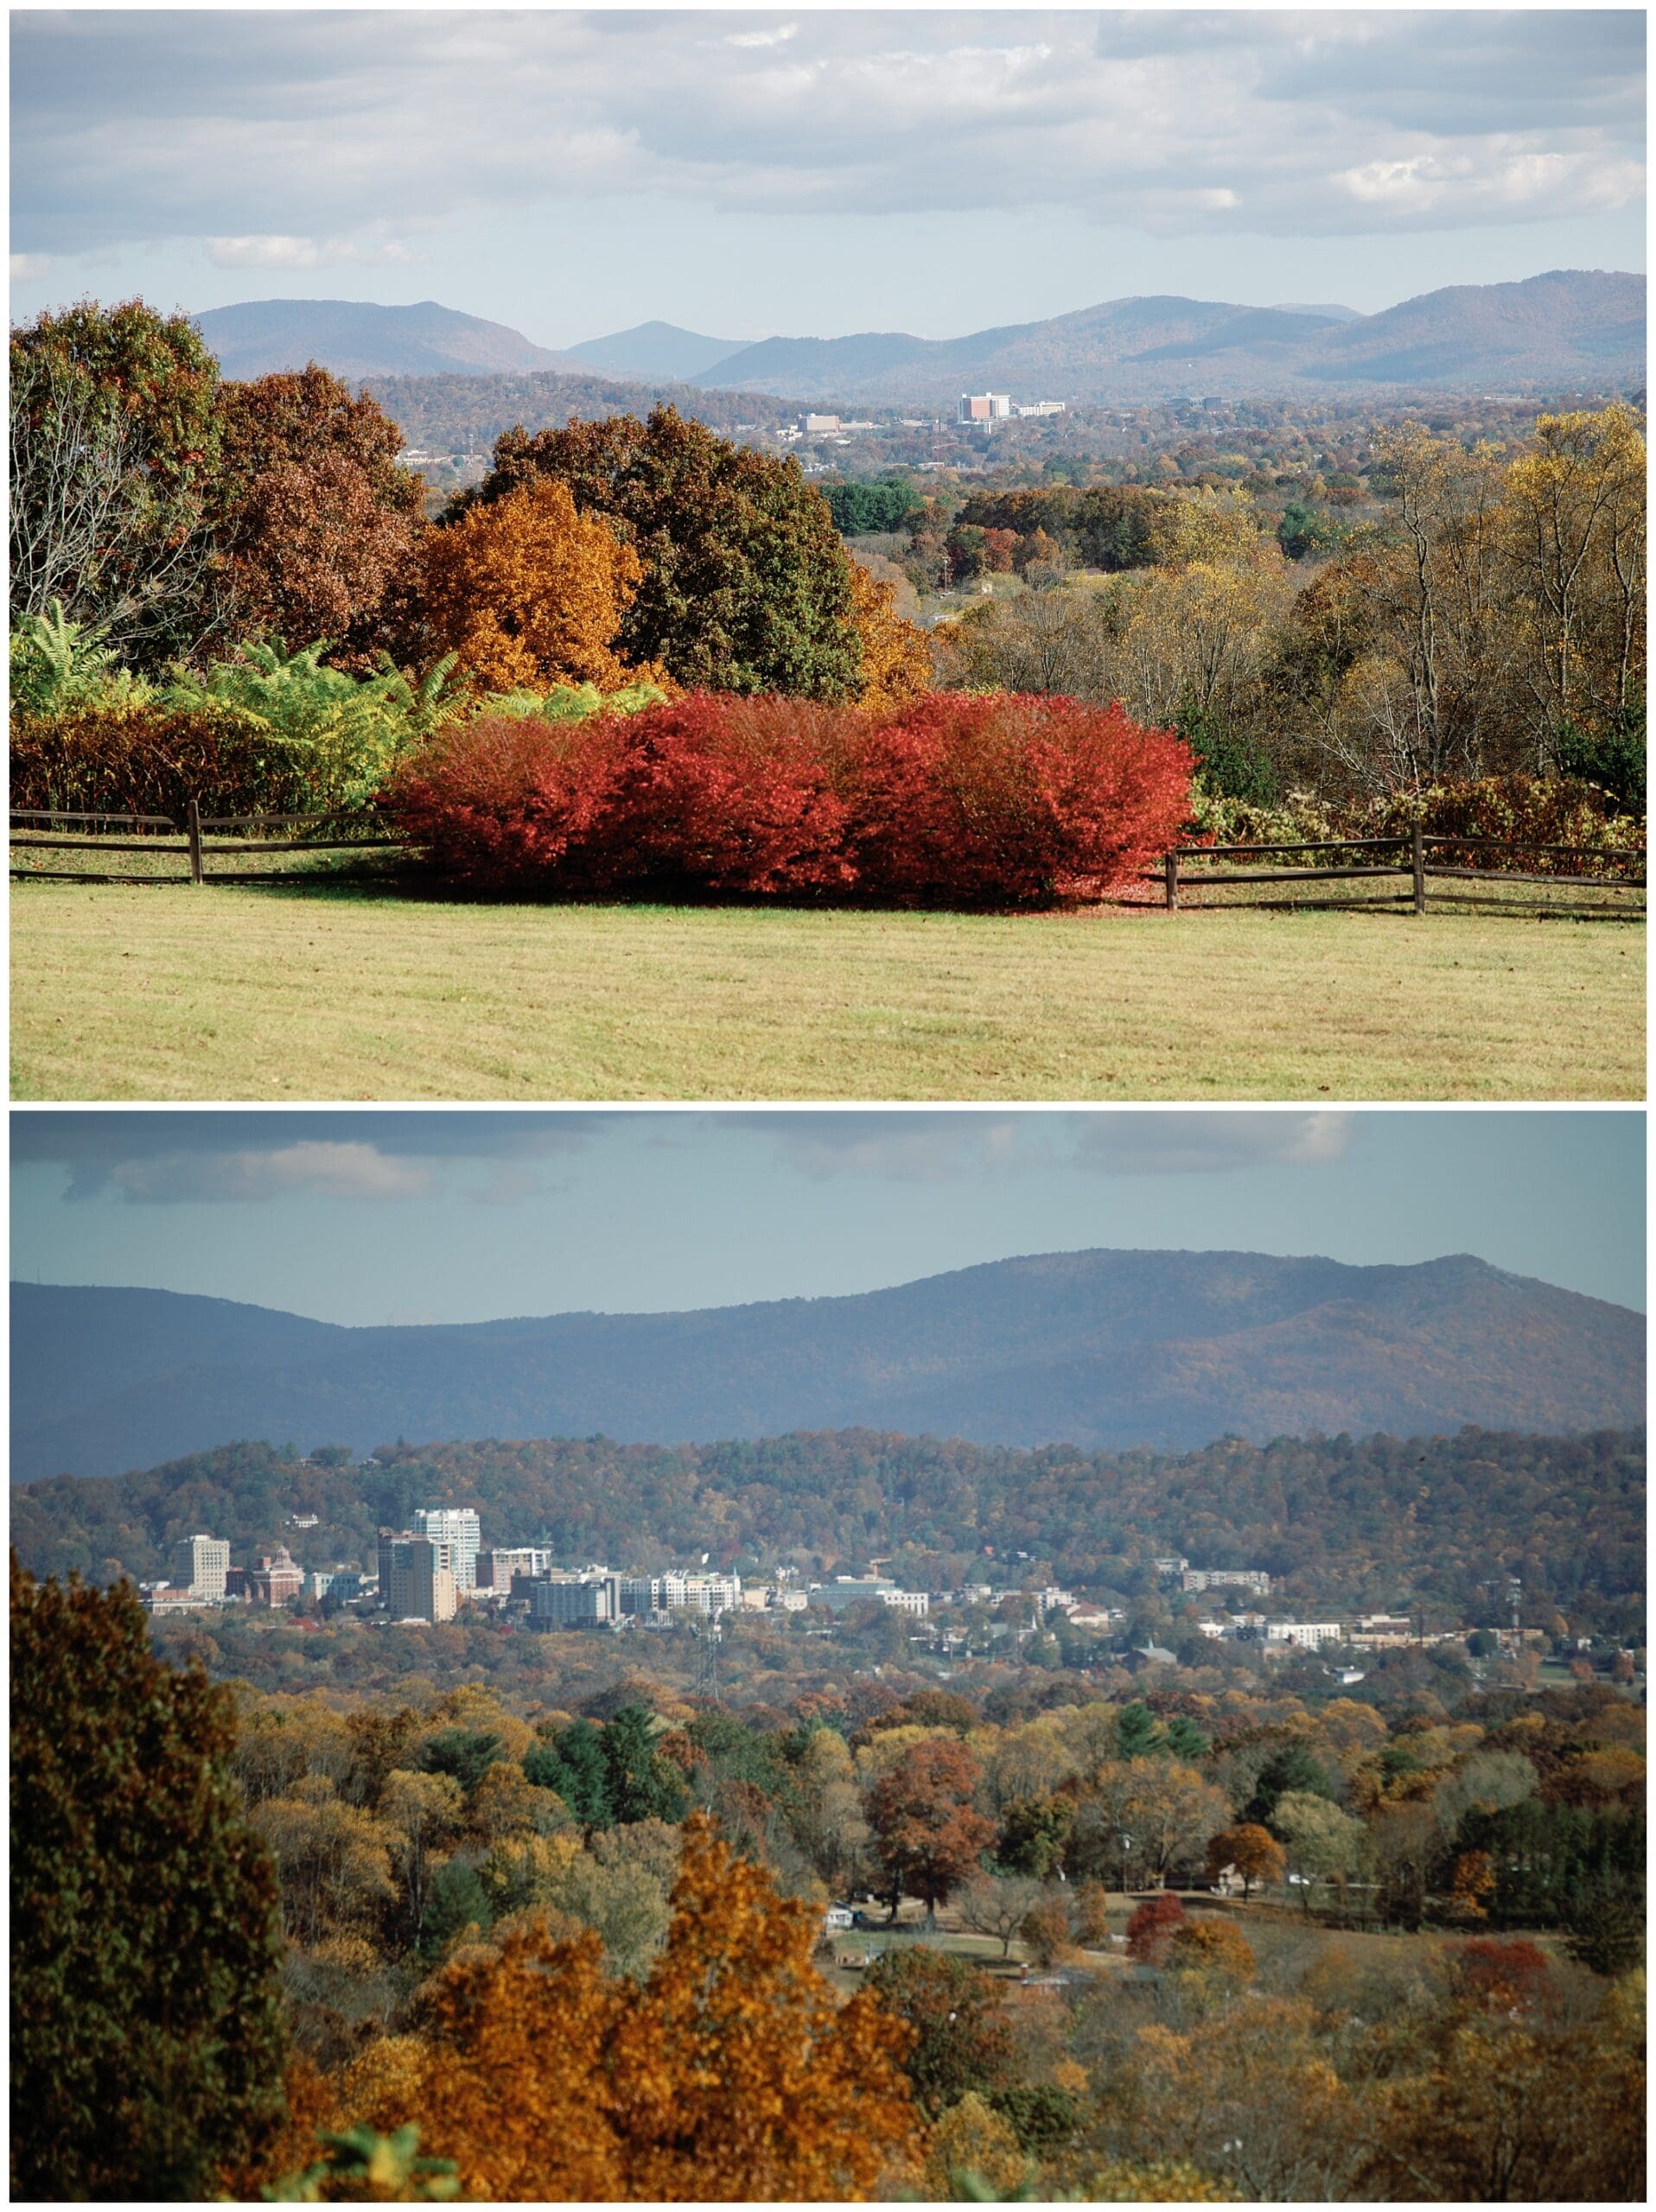 A fall wedding at Crest Center with a picturesque view of a city adorned with trees and backed by majestic mountains.